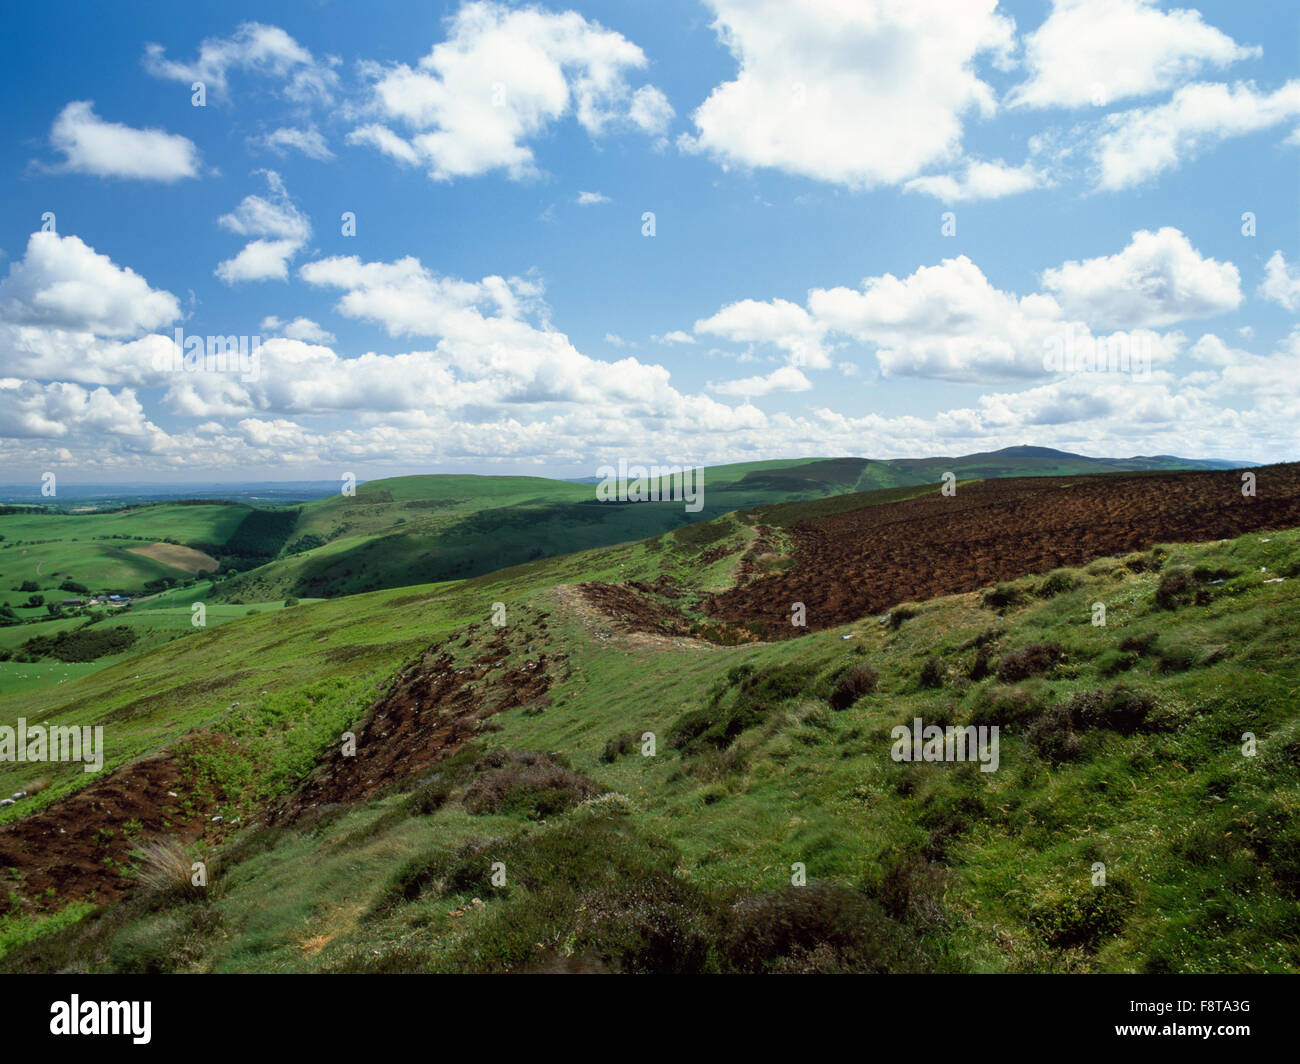 View SE along E ramparts of Penycloddiau hillfort, Flintshire, with Wheeler Valley to L & Moel Famau rear R. Heather is burnt to encourage new growth. Stock Photo